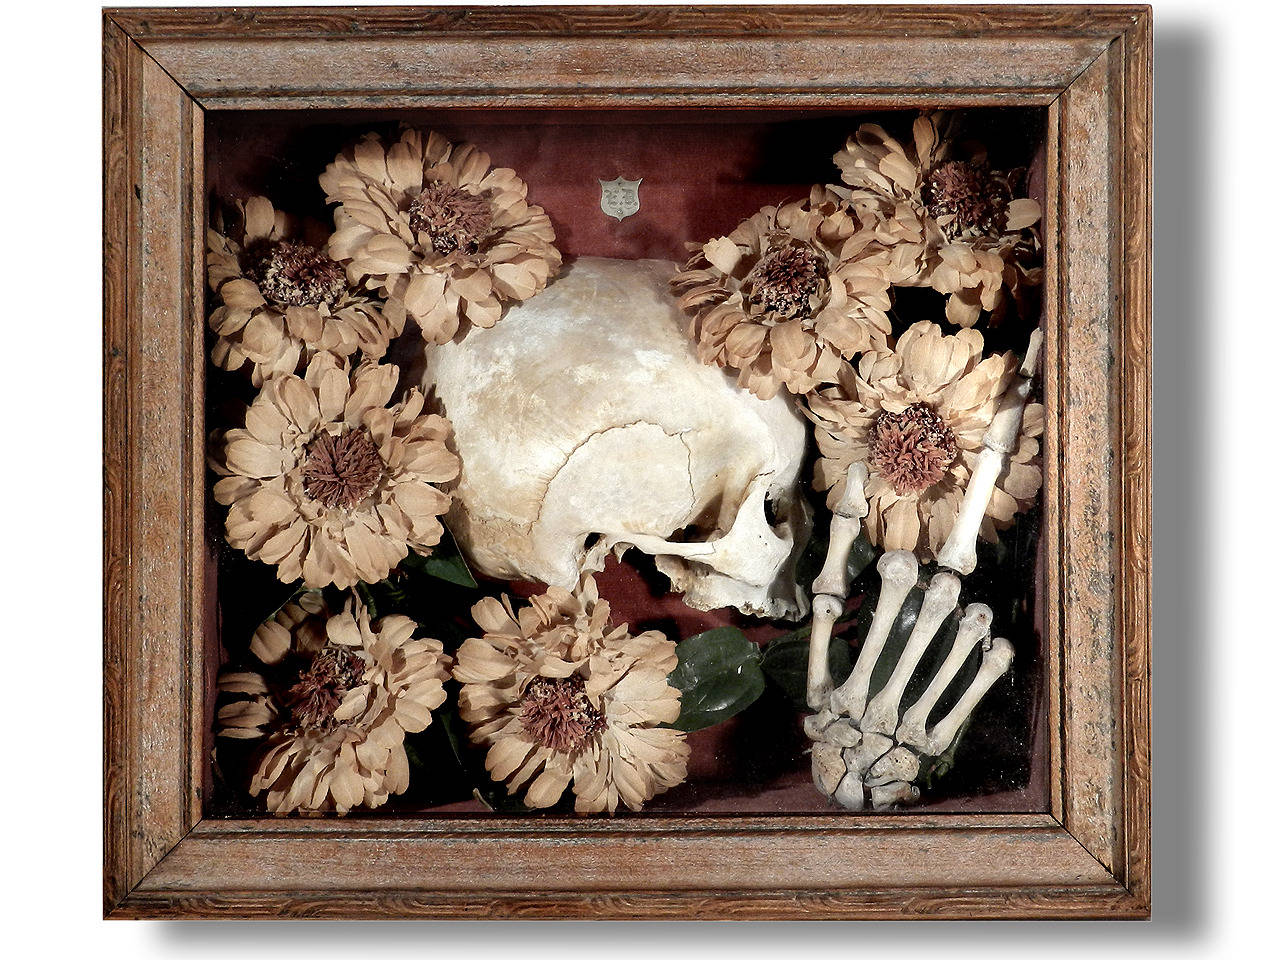 This is one of the best 19th century examples of a Memento Mori I have ever offered. It's at least 150 years old and in perfect condition. If you collect this type of rare Victorian oddity you already know just how unique this one is. There is some